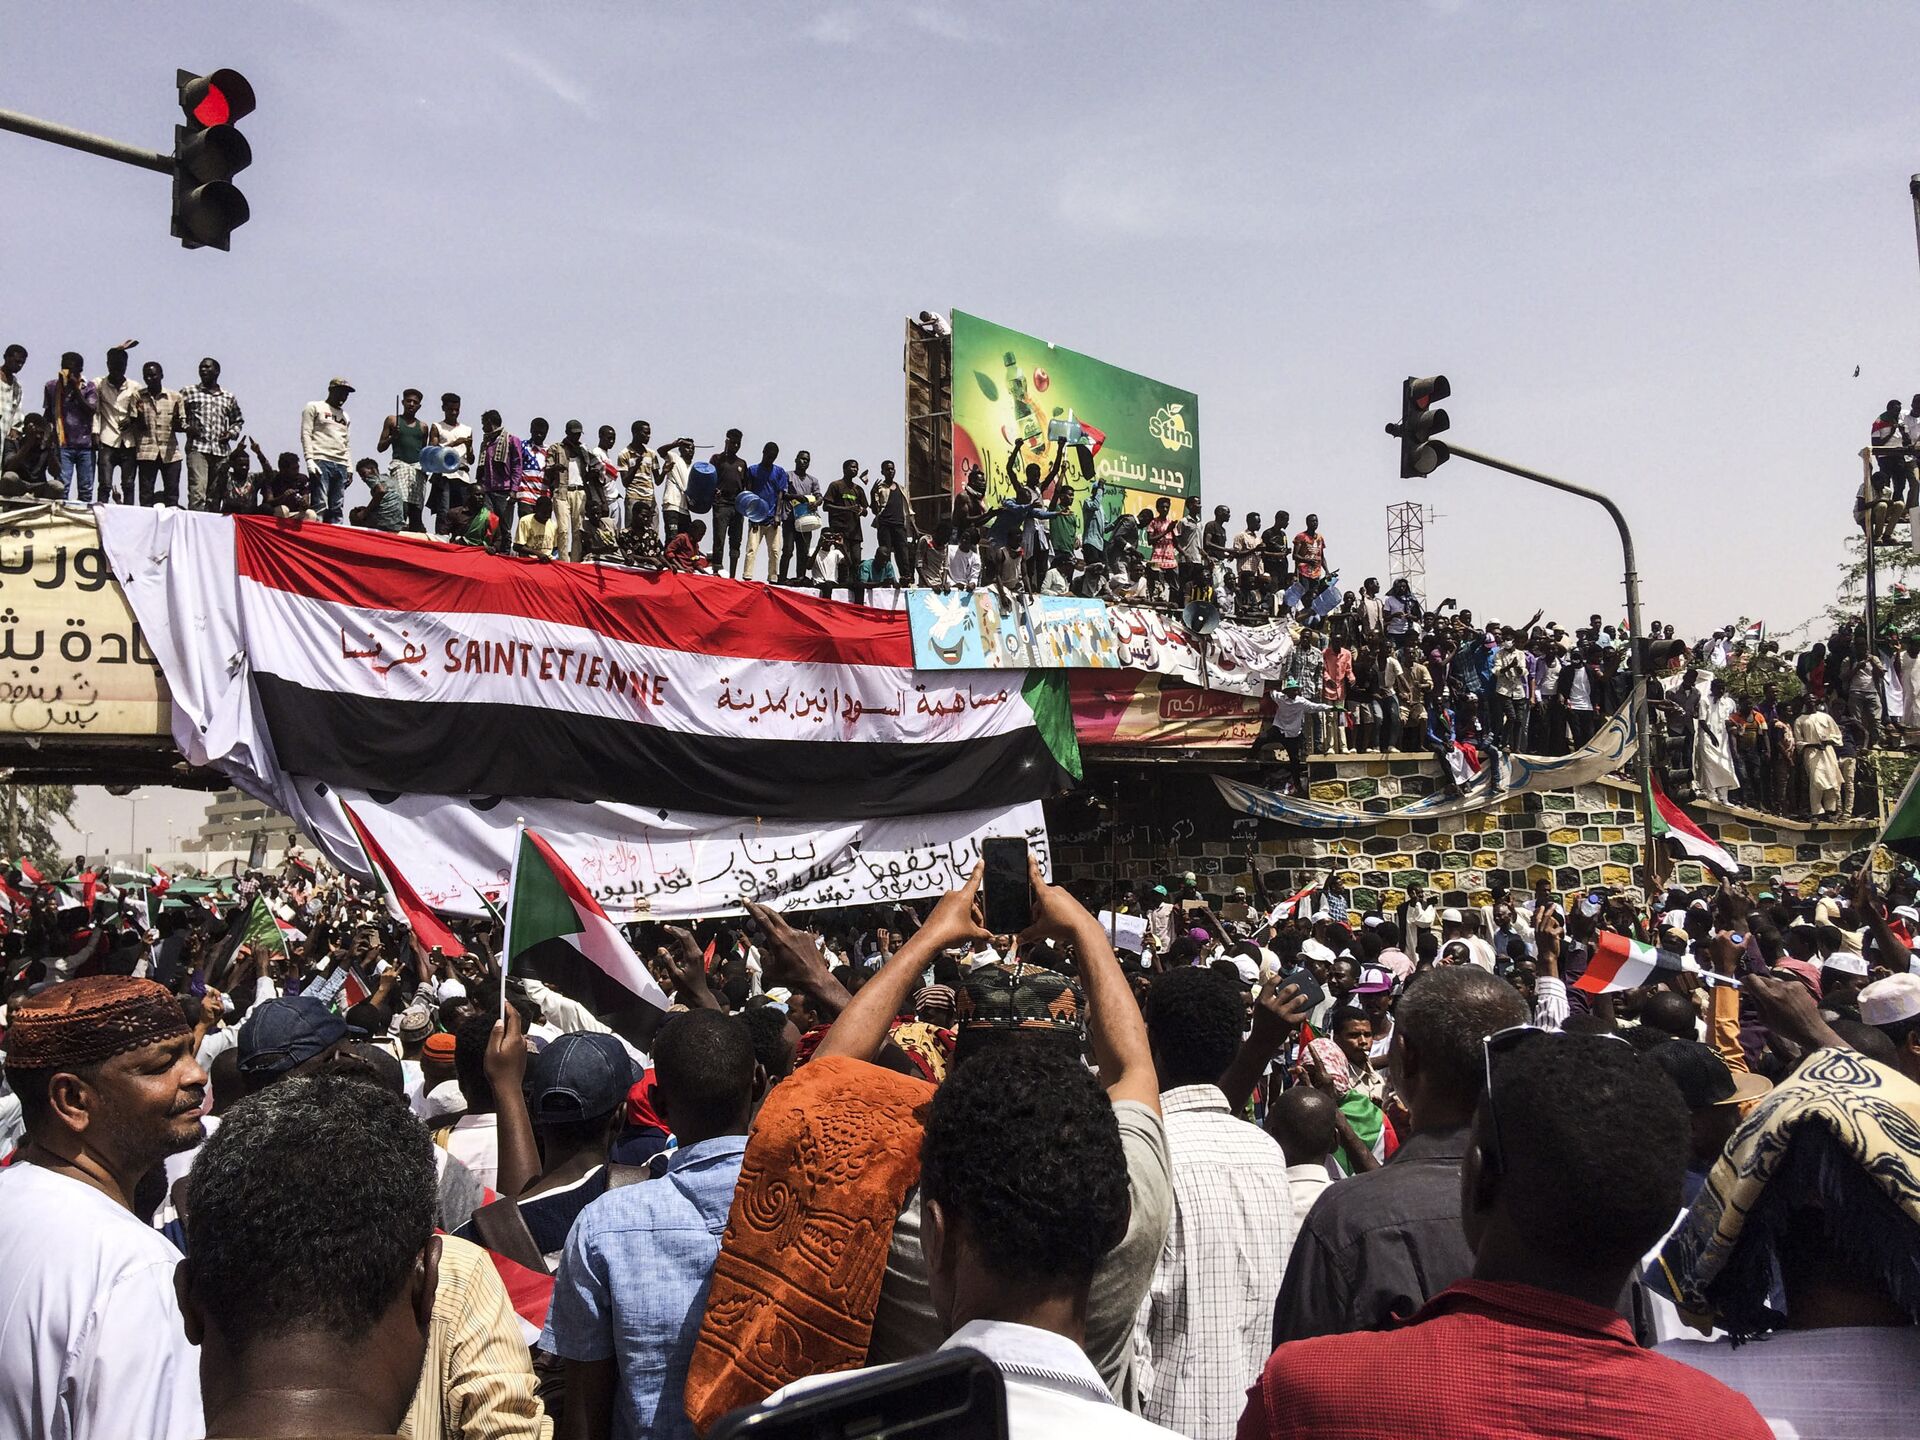 Demonstrators gather in Sudan's capital of Khartoum, Friday, April 12, 2019. The Sudanese protest movement has rejected the military's declaration that it has no ambitions to hold the reins of power for long after ousting the president of 30 years, Omar al-Bashir. The writing on the Sudanese flag says 'With the participation of the Sudanese in Saint Etienne, France.' - Sputnik International, 1920, 20.10.2021